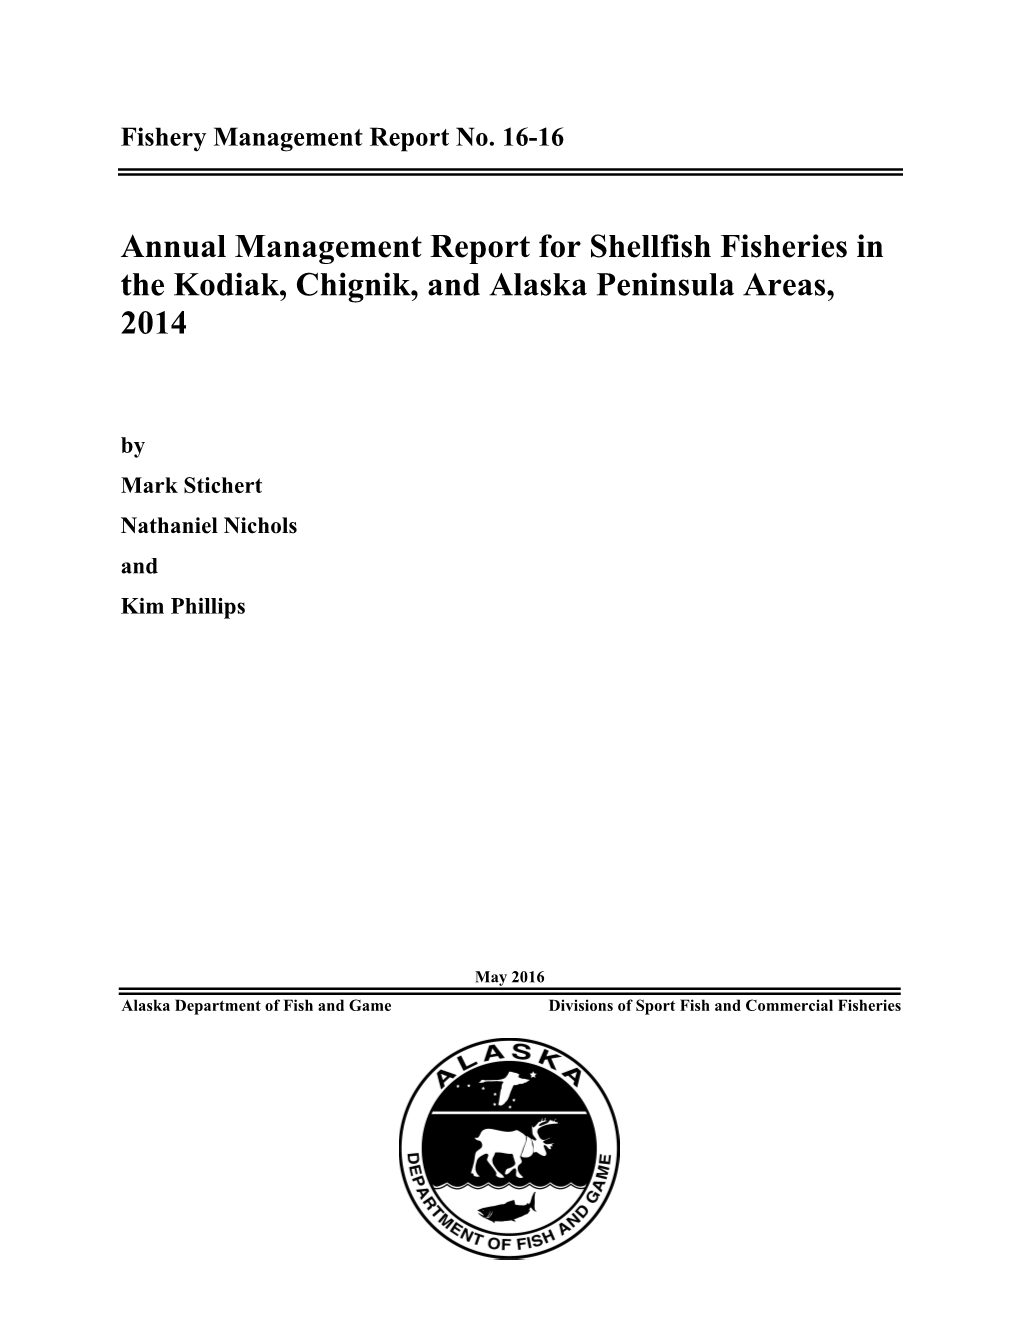 Annual Management Report for Shellfish Fisheries in the Kodiak, Chignik, and South Alaska Peninsula Management Areas, 2014